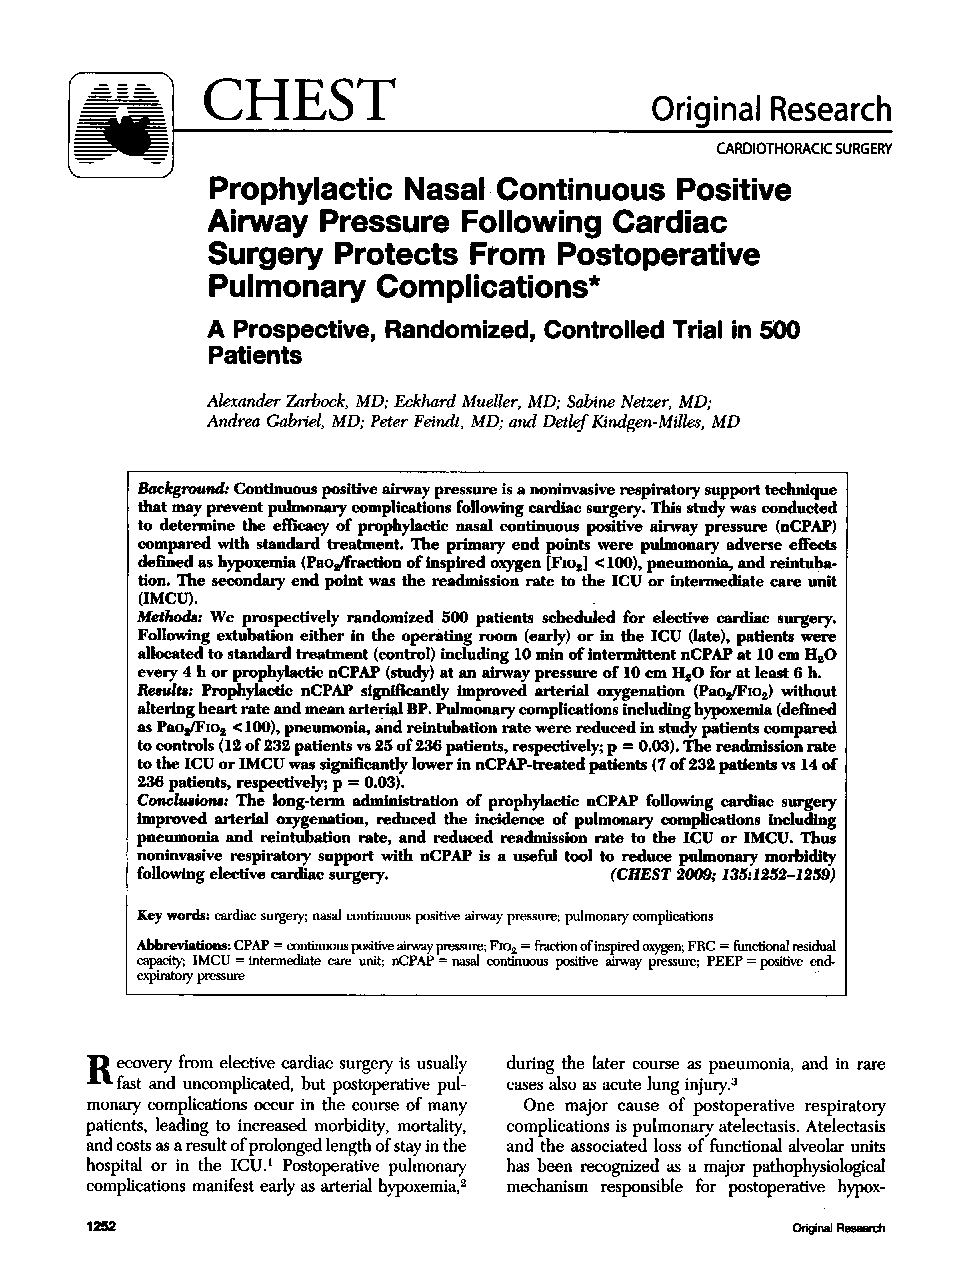 Prophylactic Nasal Continuous Positive Airway Pressure Following Cardiac Surgery Protects From Postoperative Pulmonary Complications : A Prospective, Randomized, Controlled Trial in 500 Patients